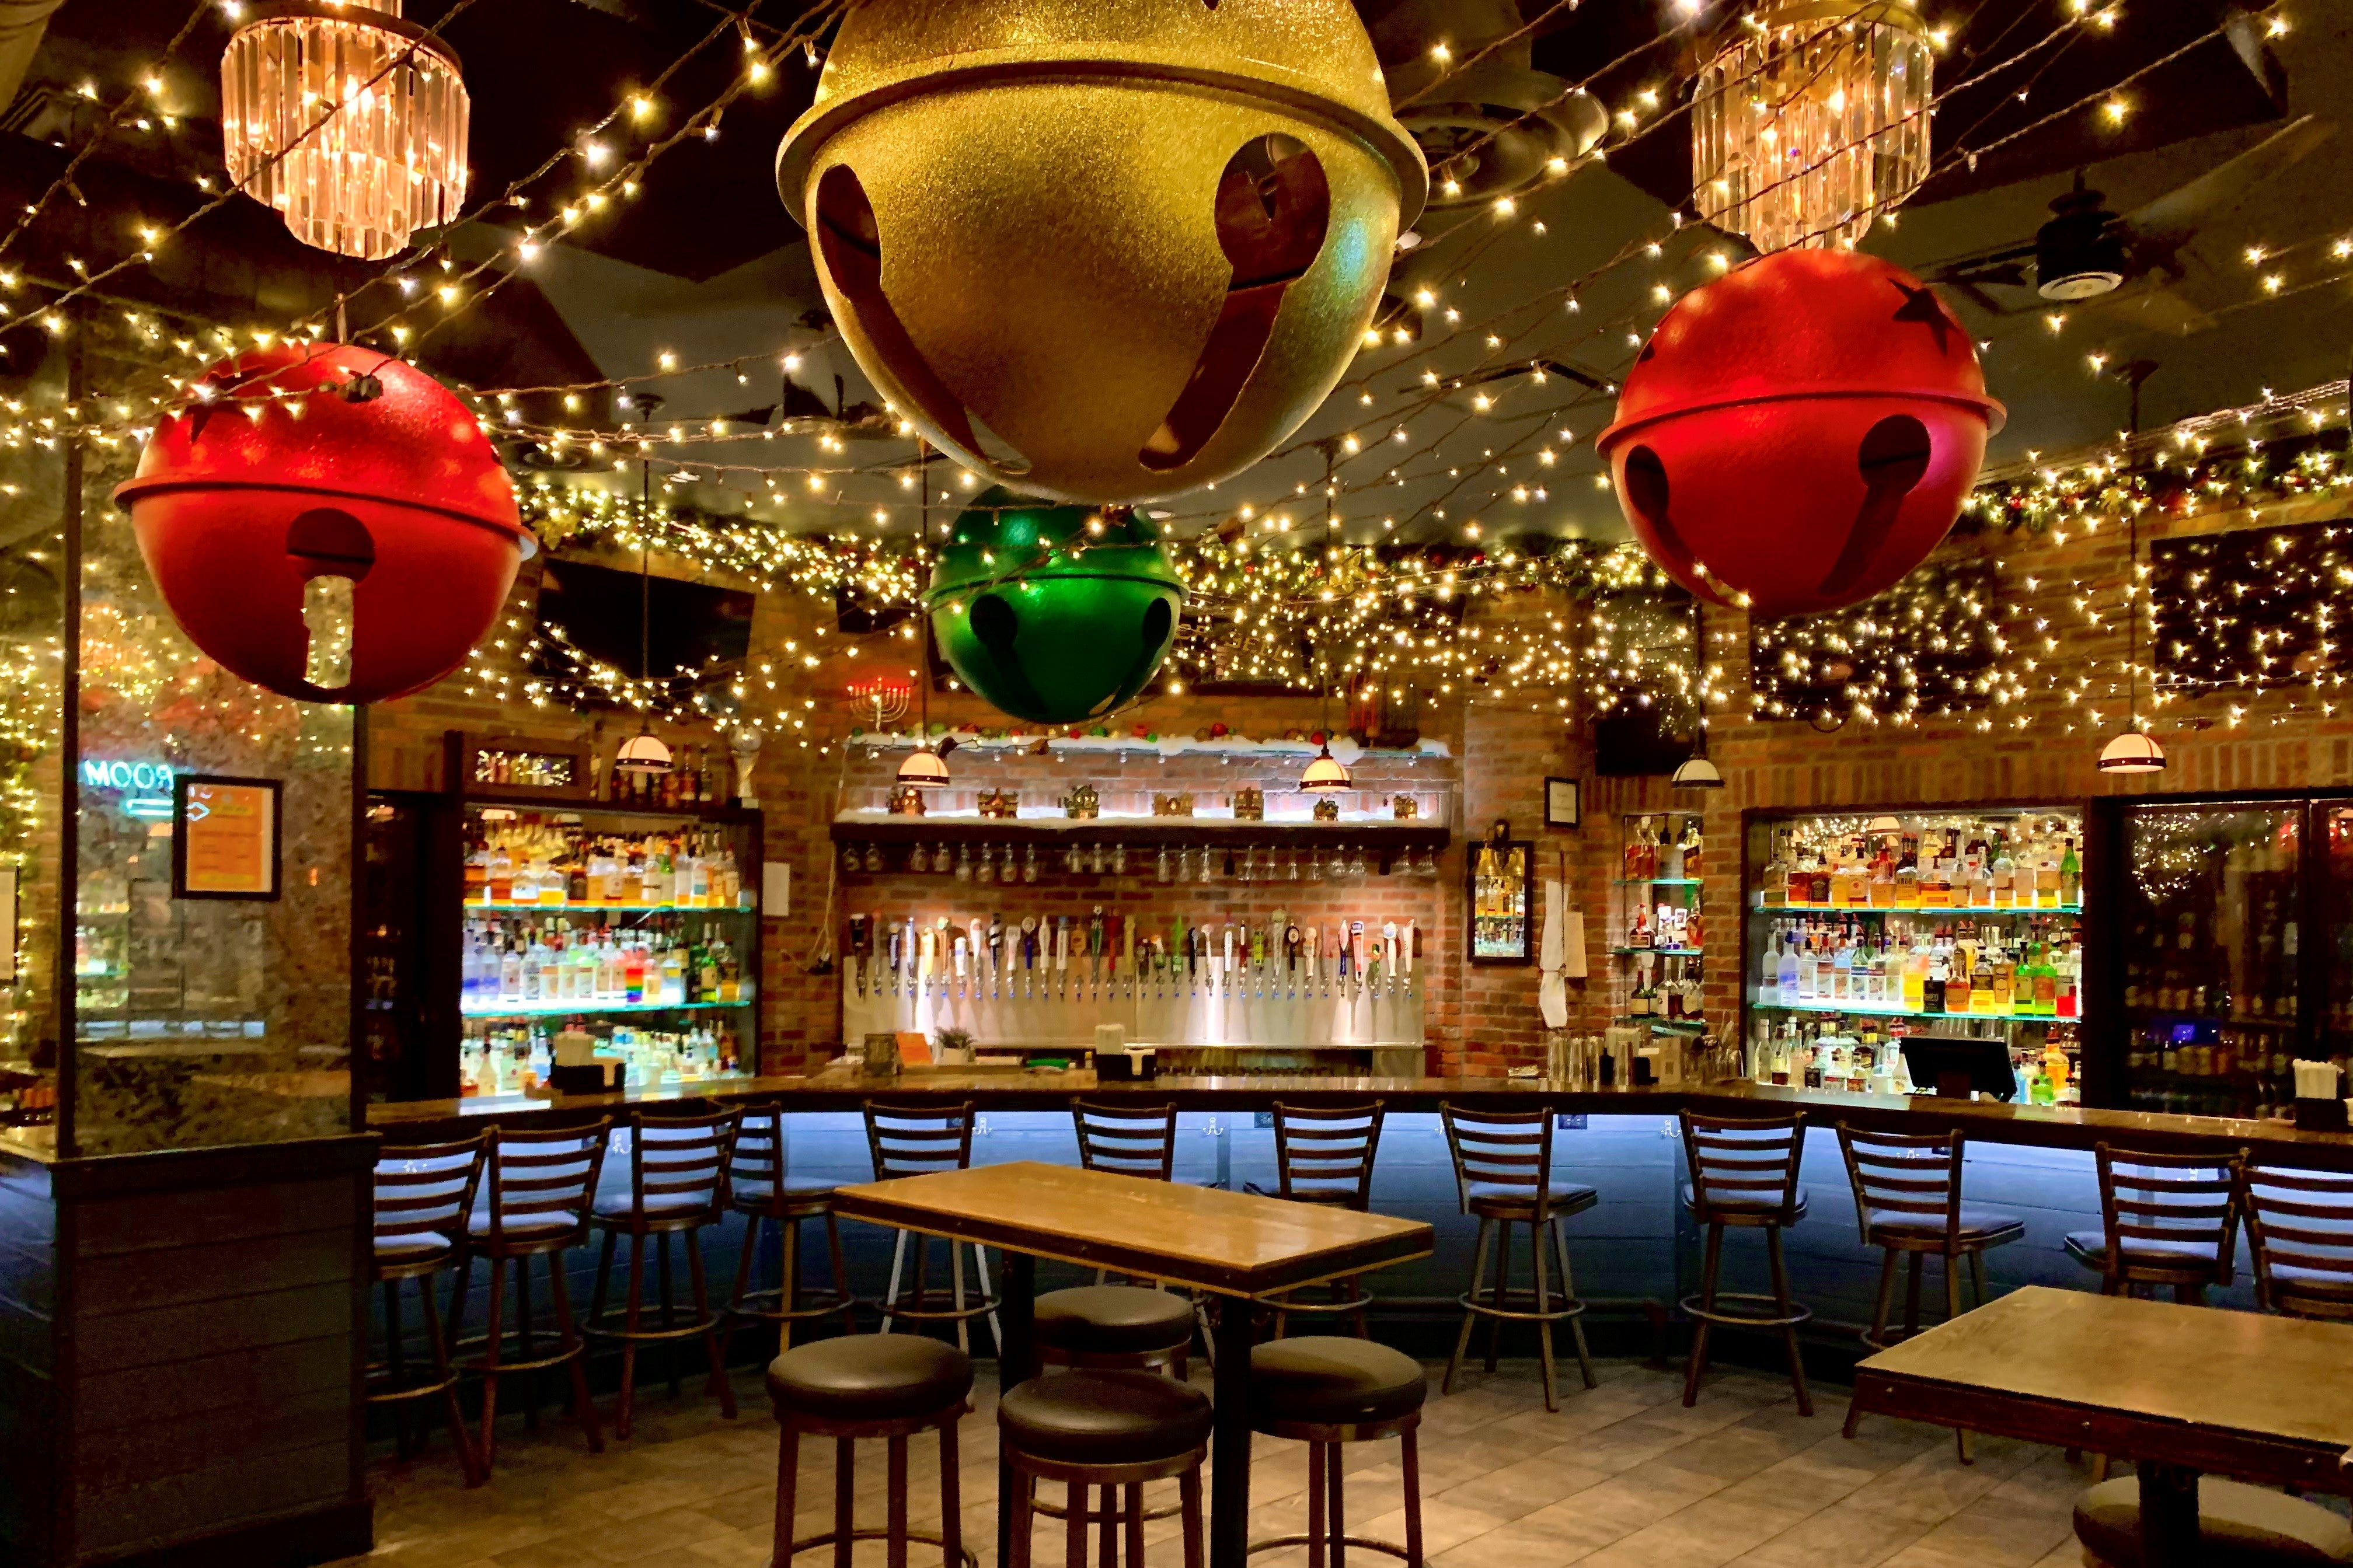 The Chelsea Bell - NYC Top Holiday Restuarant - Christmas Decorations - Bar Area - Hanging Bells